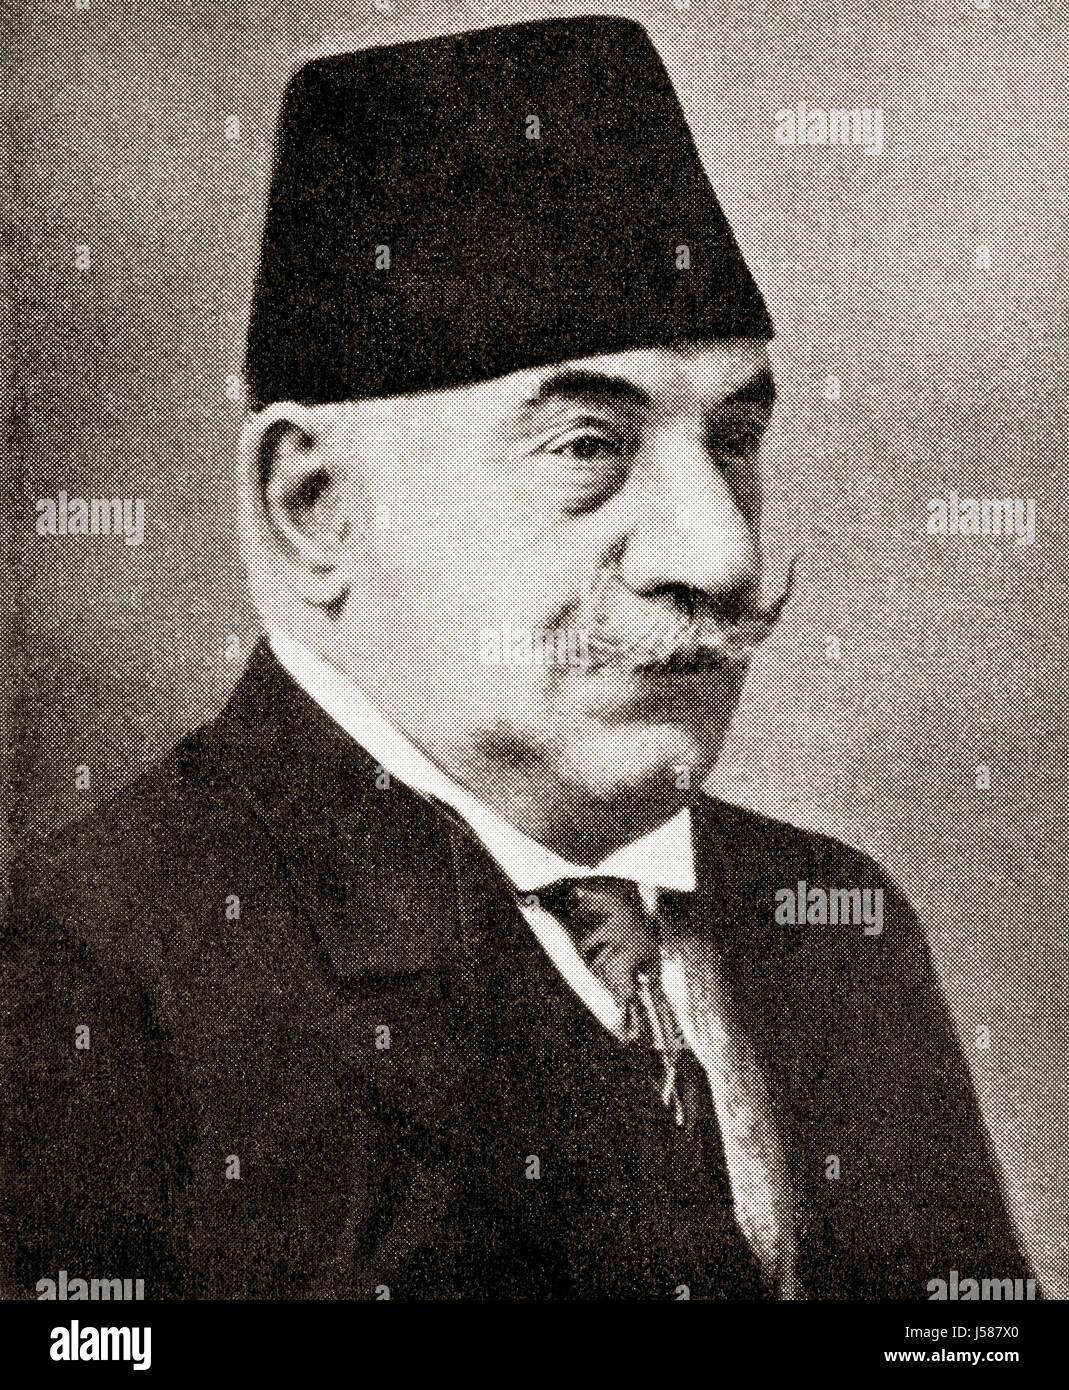 Hüseyin Nazım Pasha, 1848 – 1913. Turkish Chief of Staff of the military of the Ottoman Empire during the First Balkan War.  From Hutchinson's History of the Nations, published 1915. Stock Photo